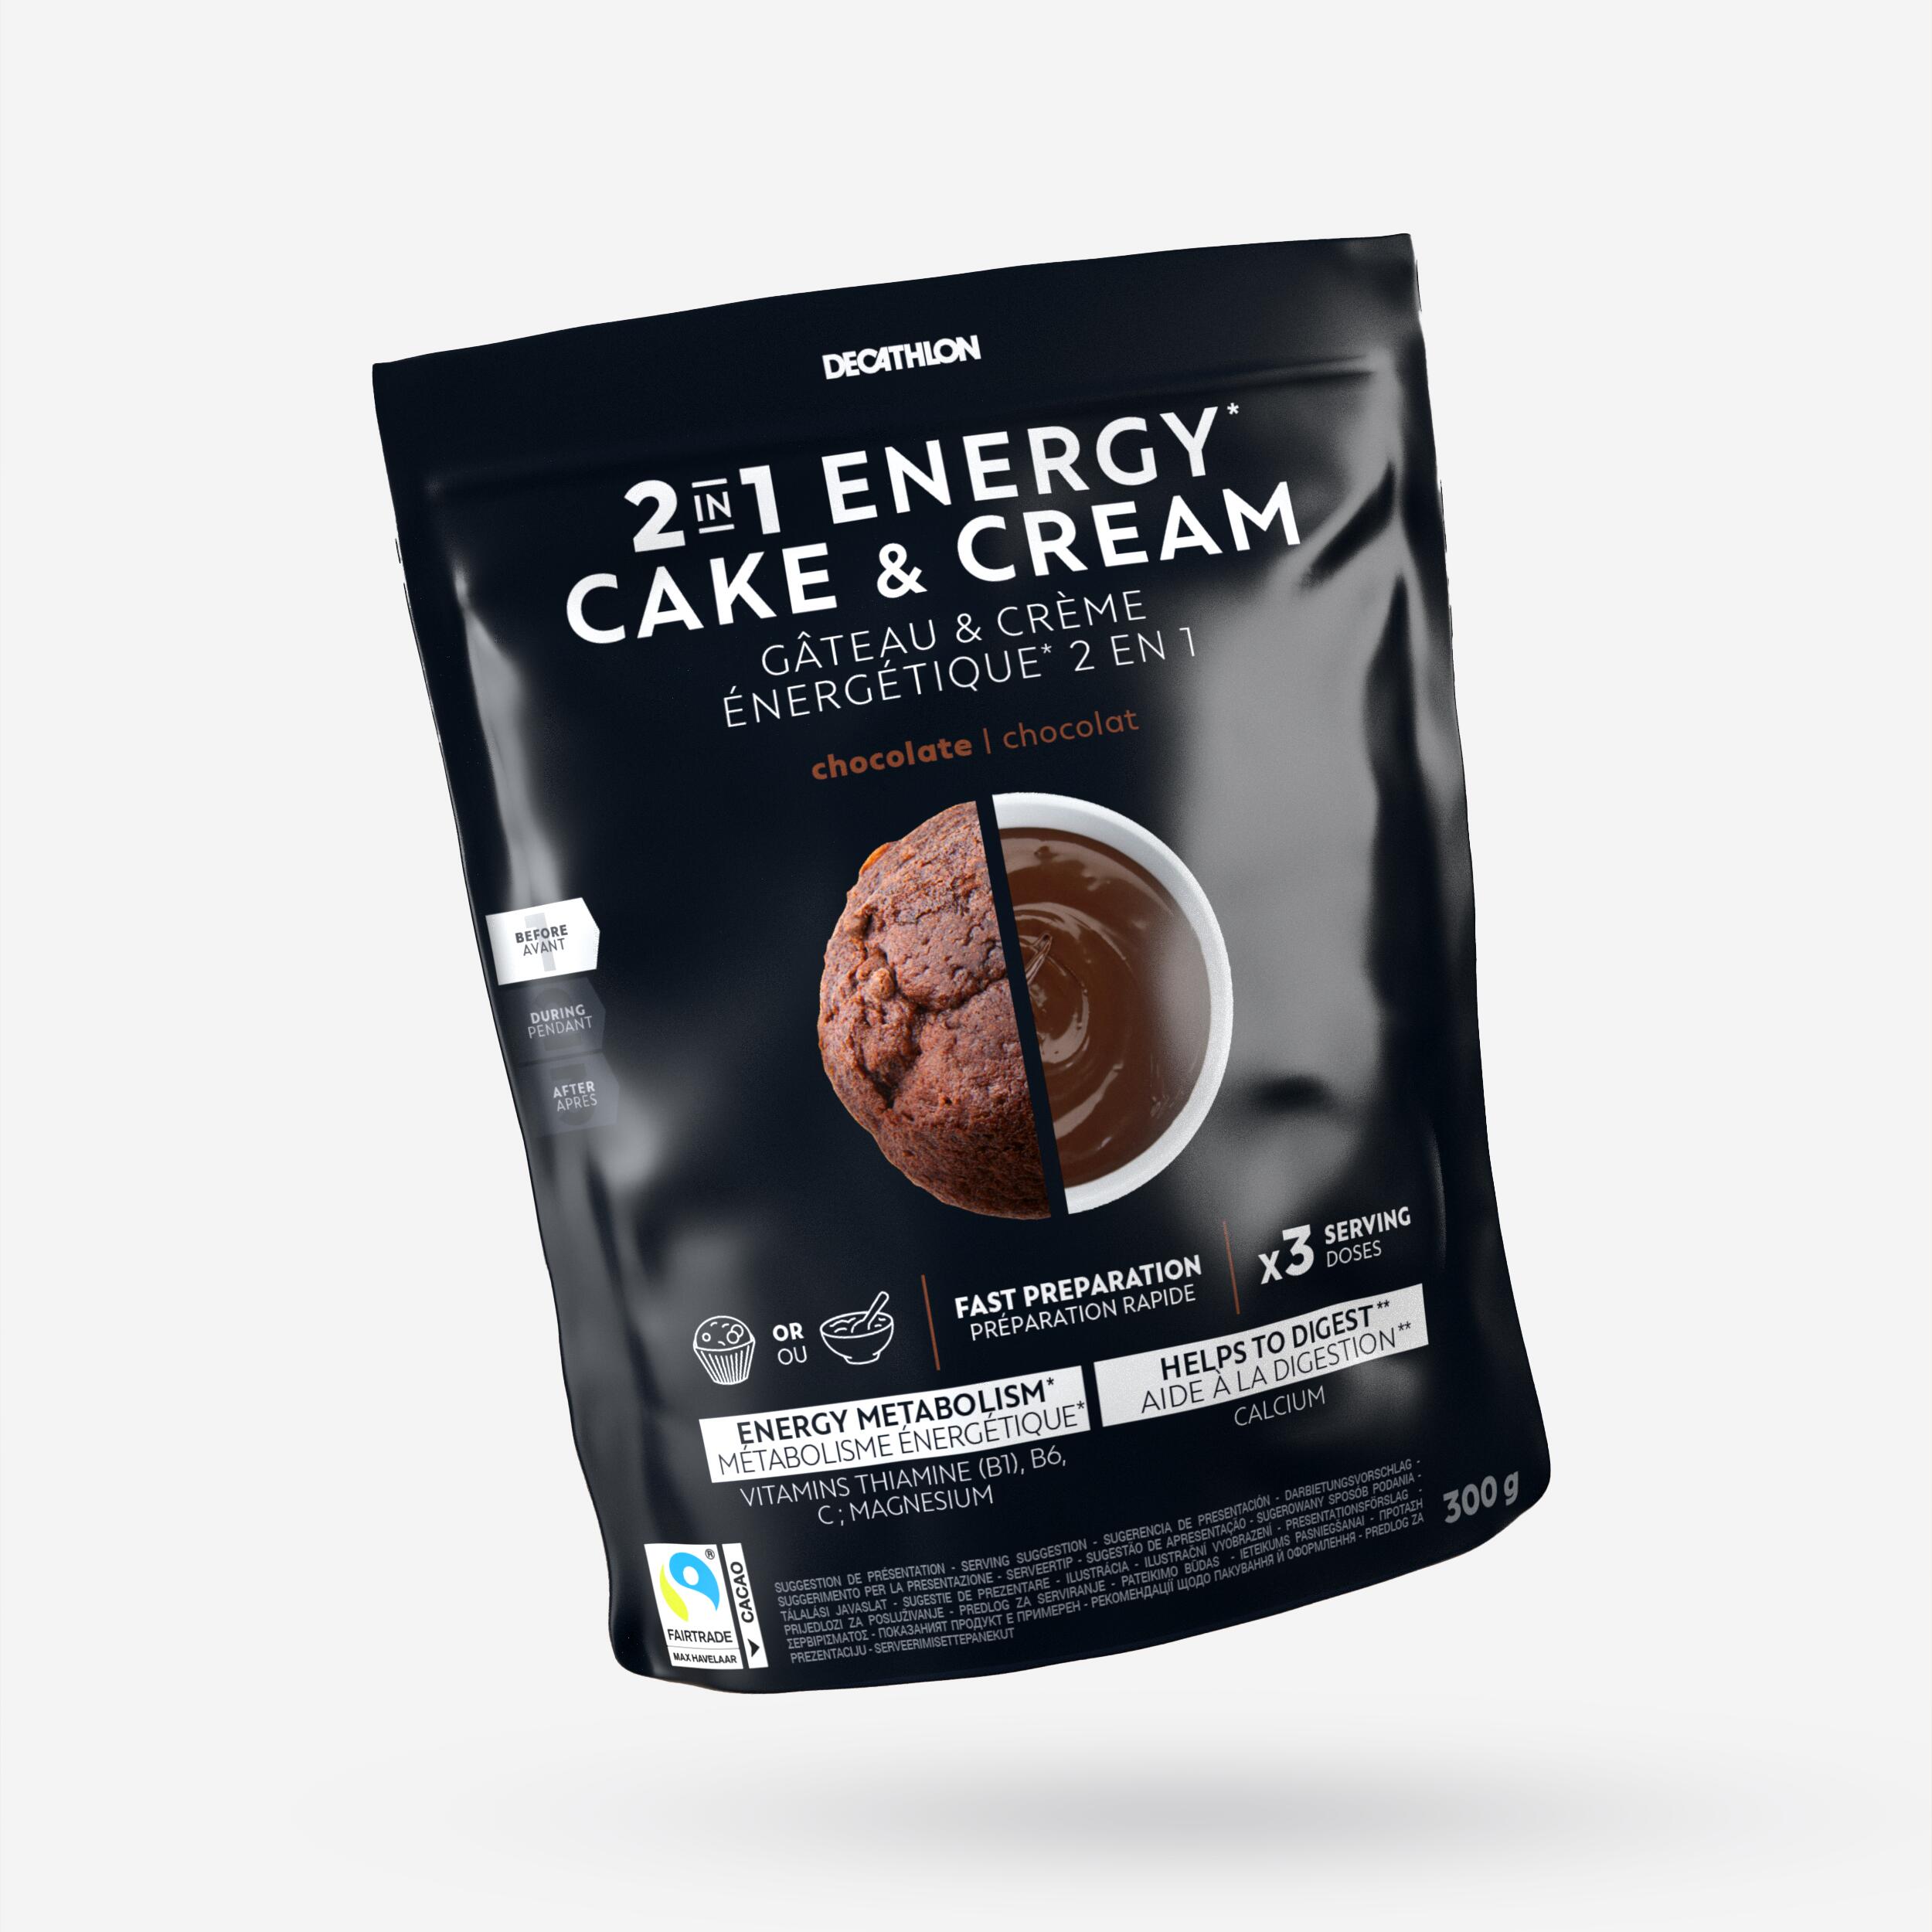 2 IN 1 Energy Cake and Cream Chocolate 1/3